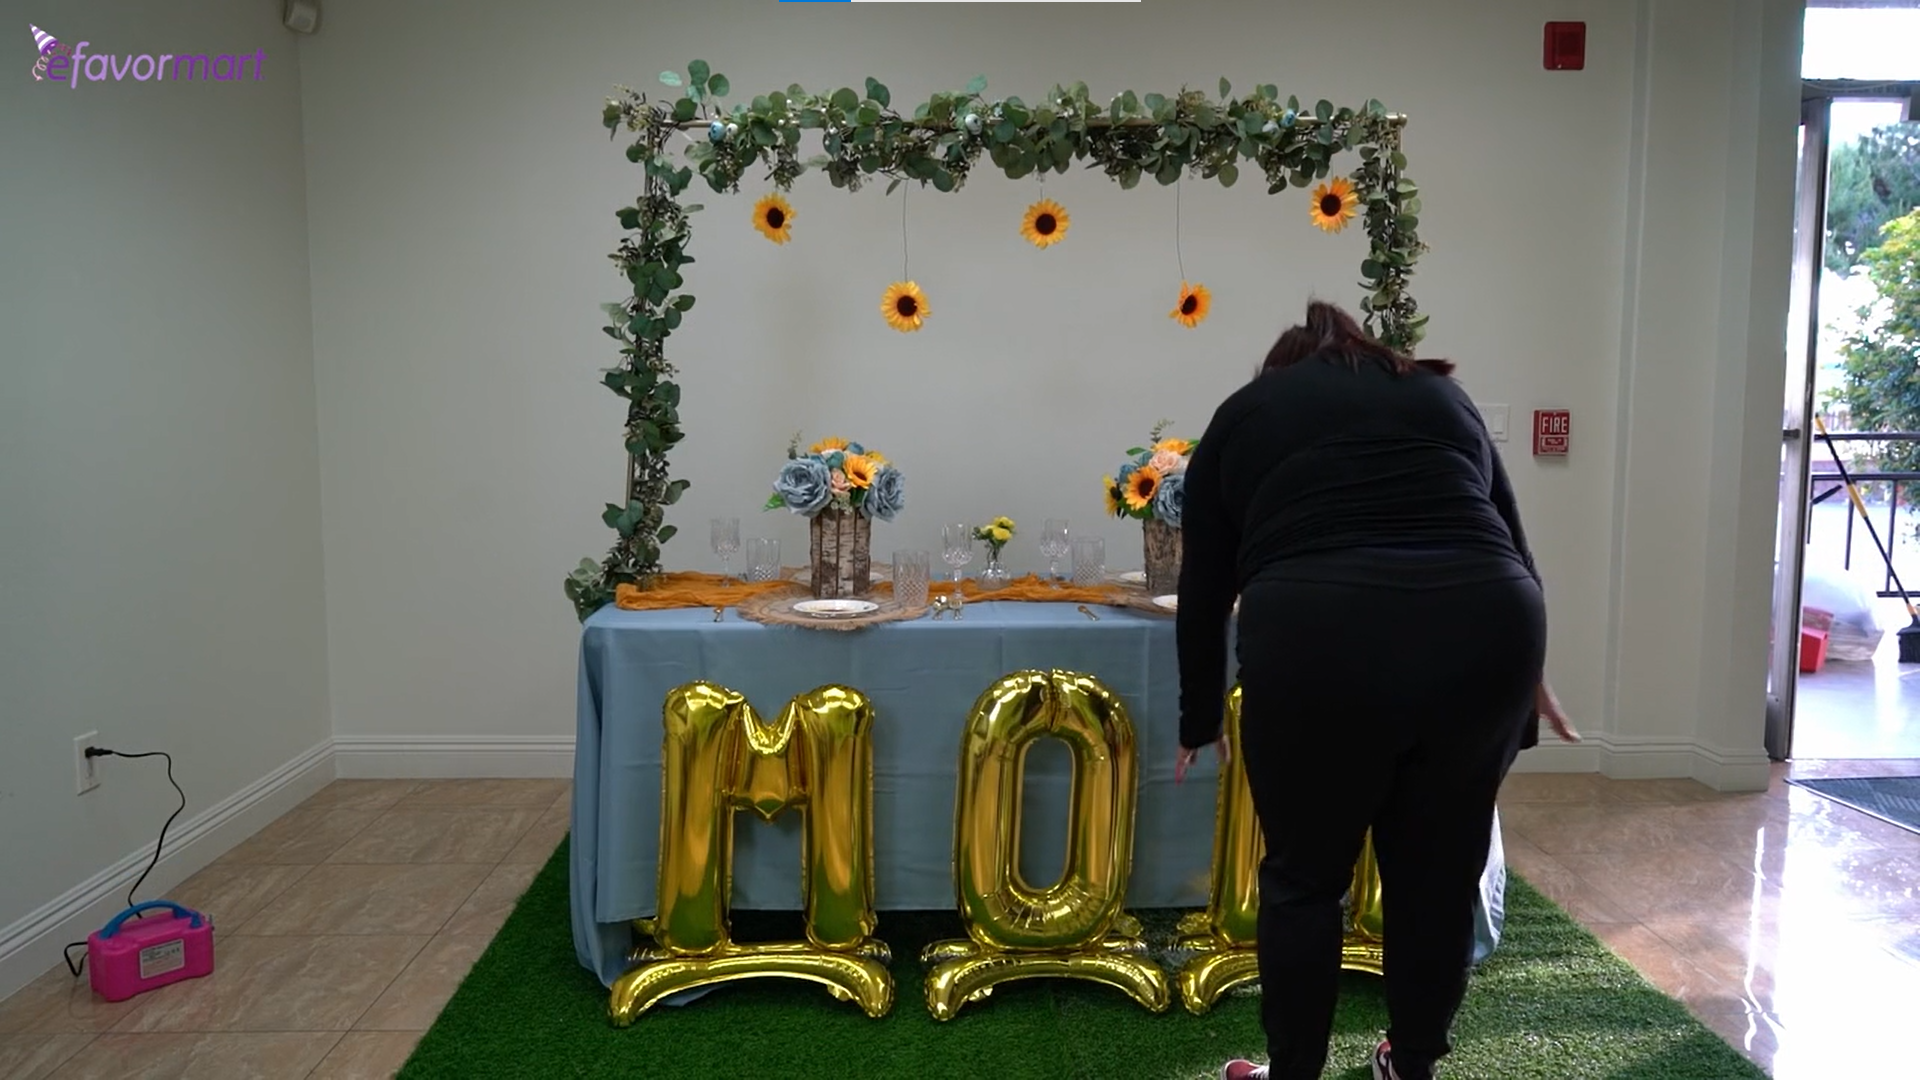 Person setting up inflated letter balloons